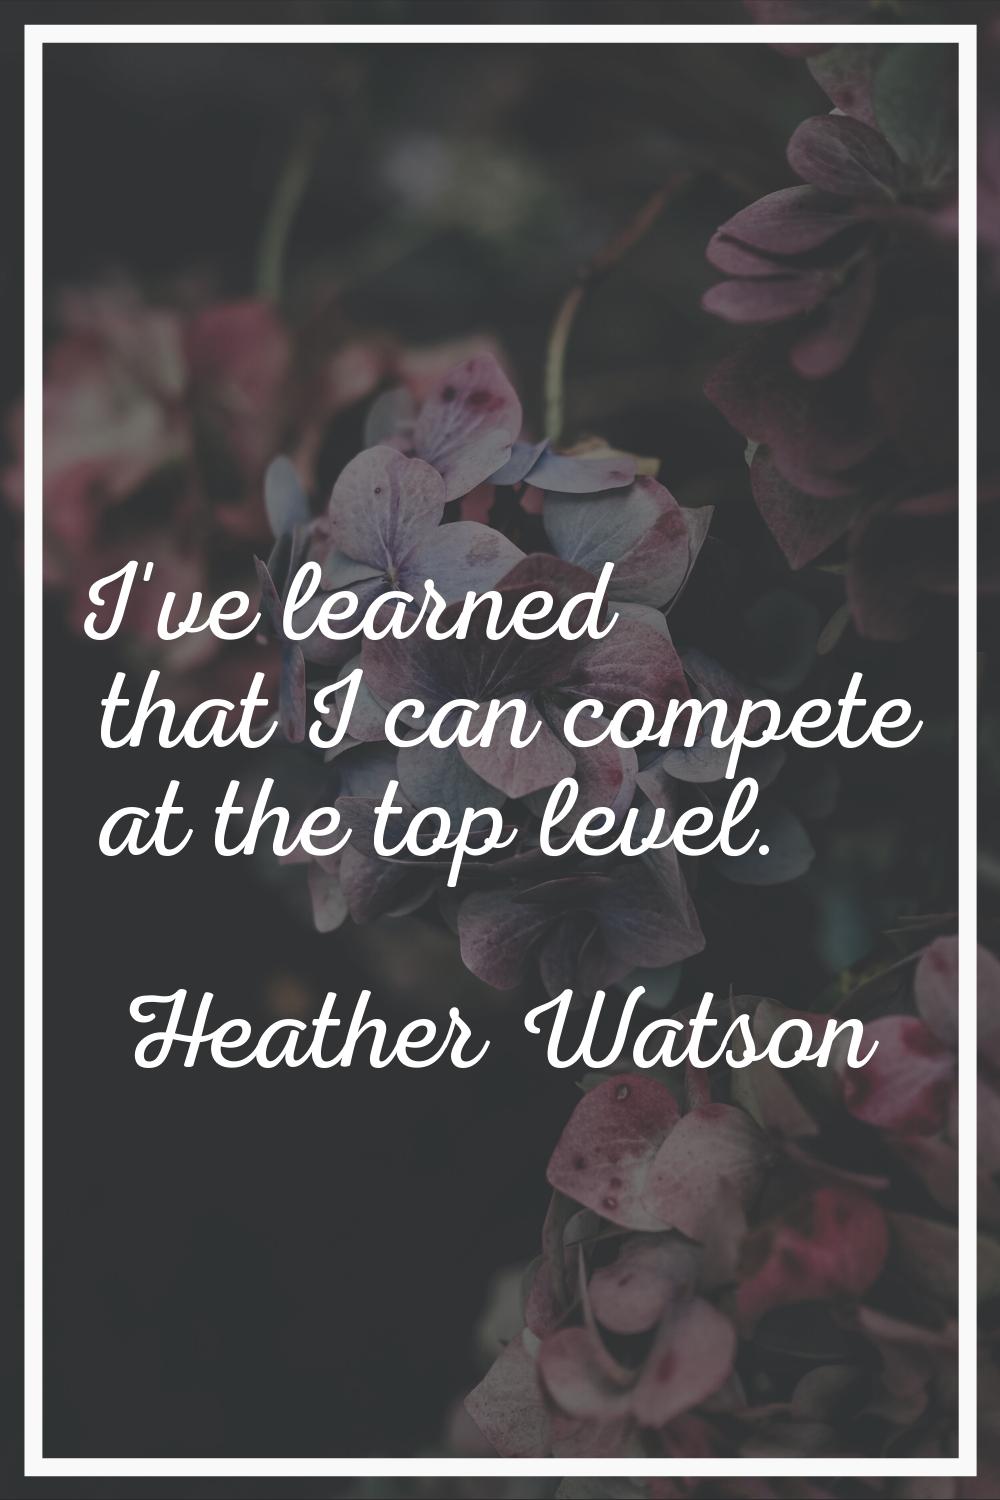 I've learned that I can compete at the top level.